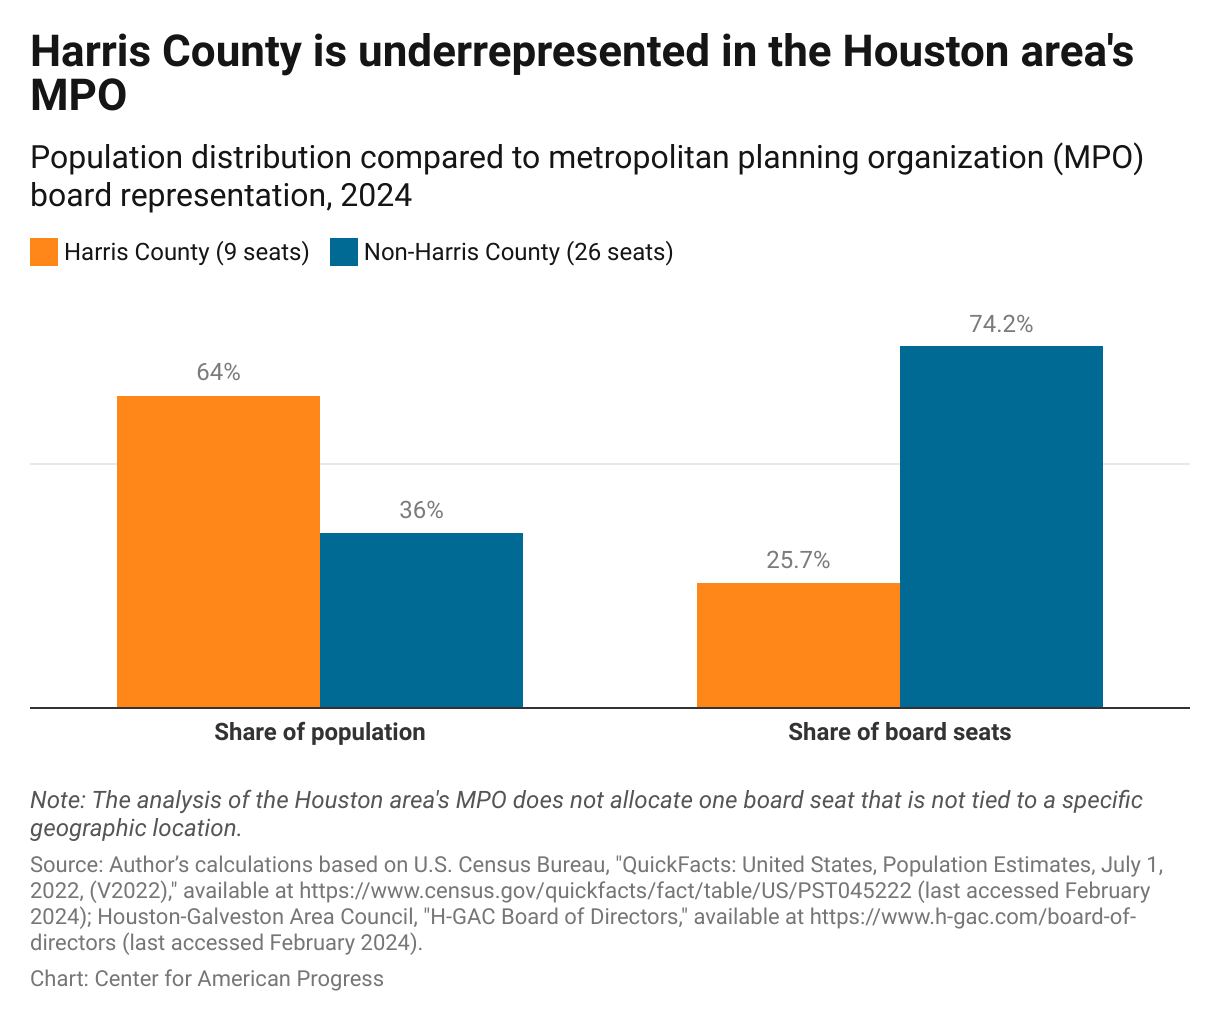 Column chart showing that Harris County, where the city of Houston lies, is underrepresented on the Houston-Galveston Area Council. 